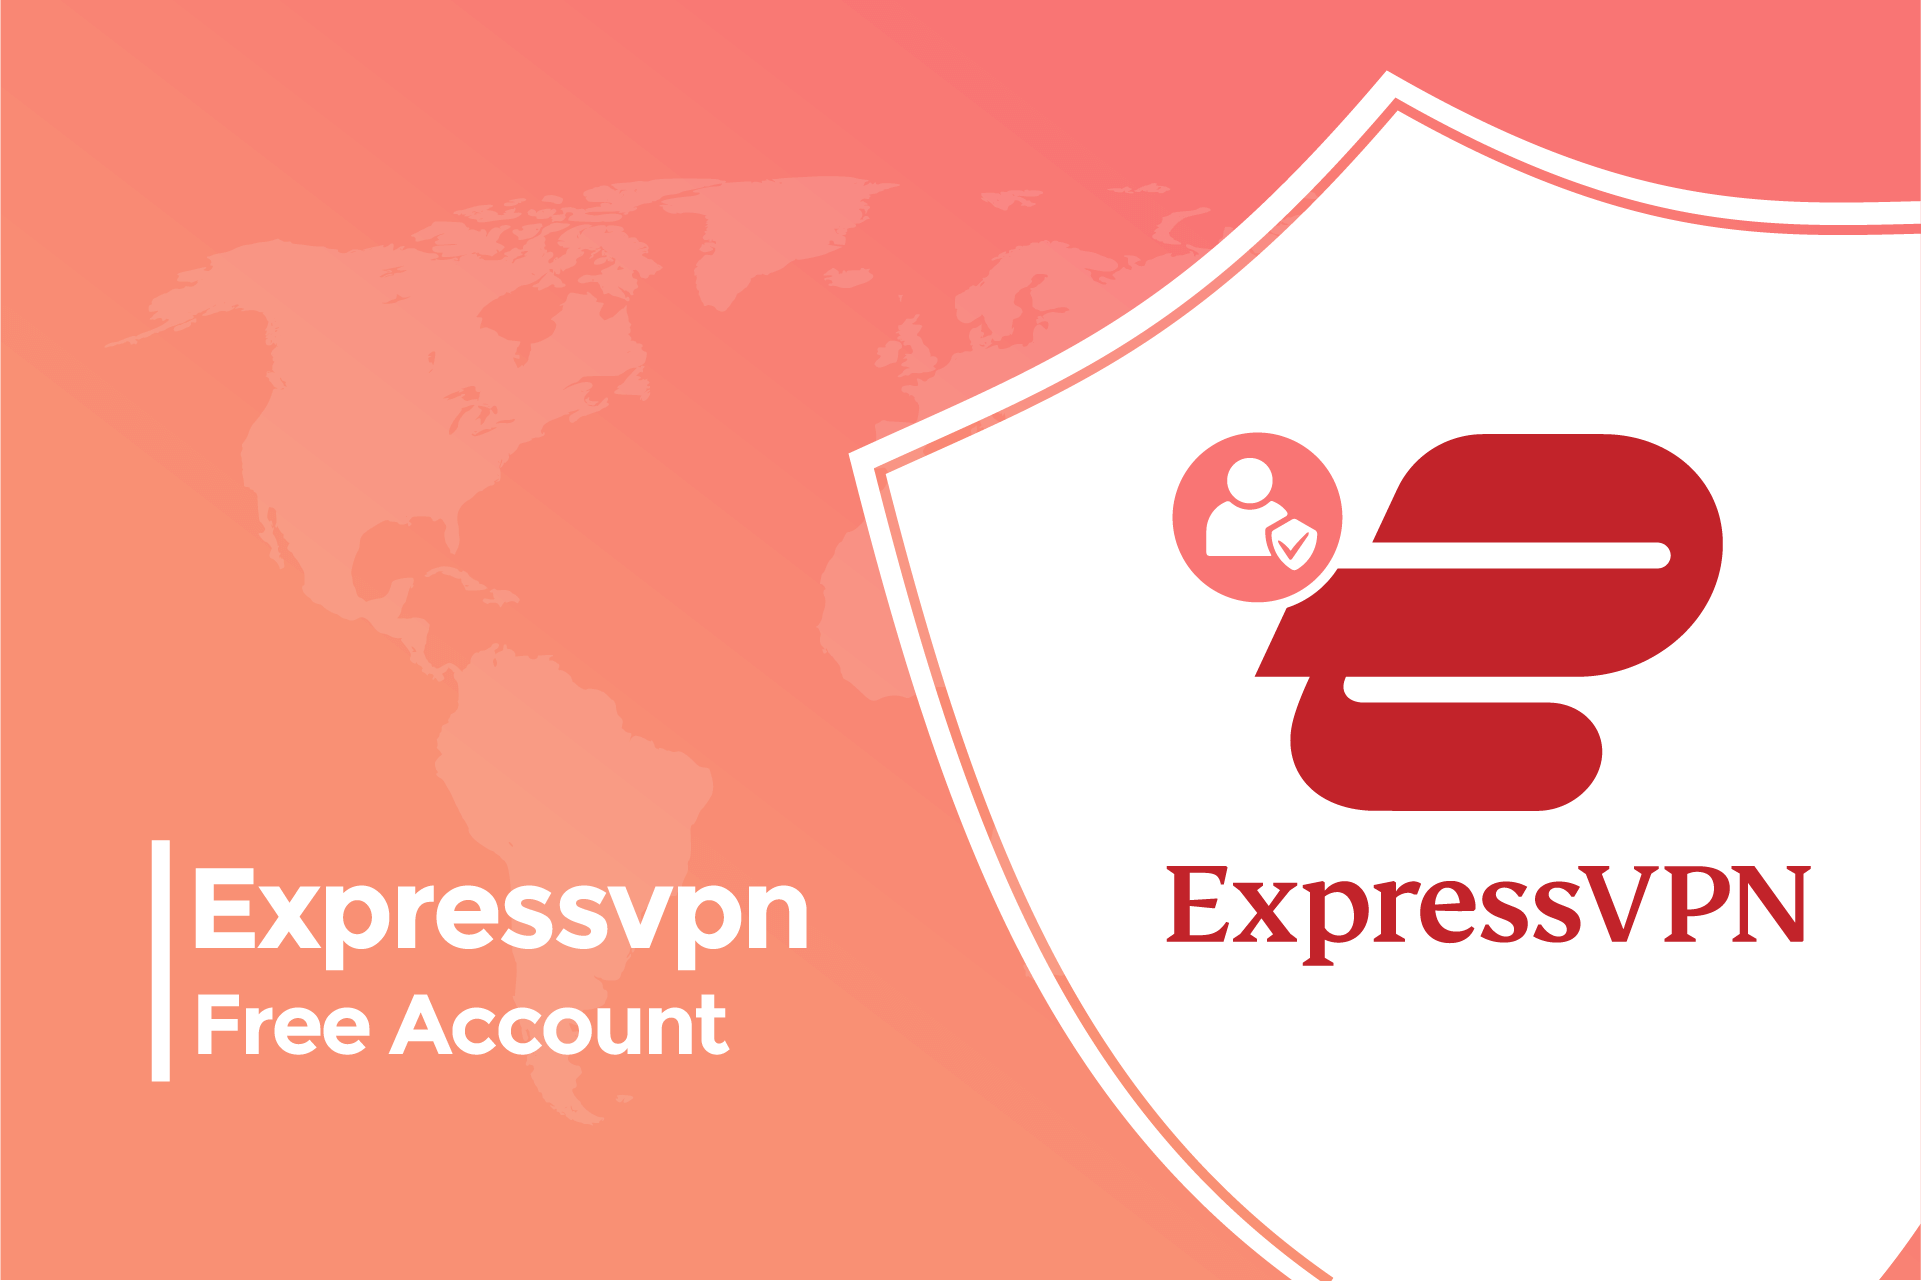 ExpressVPN Free Account: Is Reliable or Not?